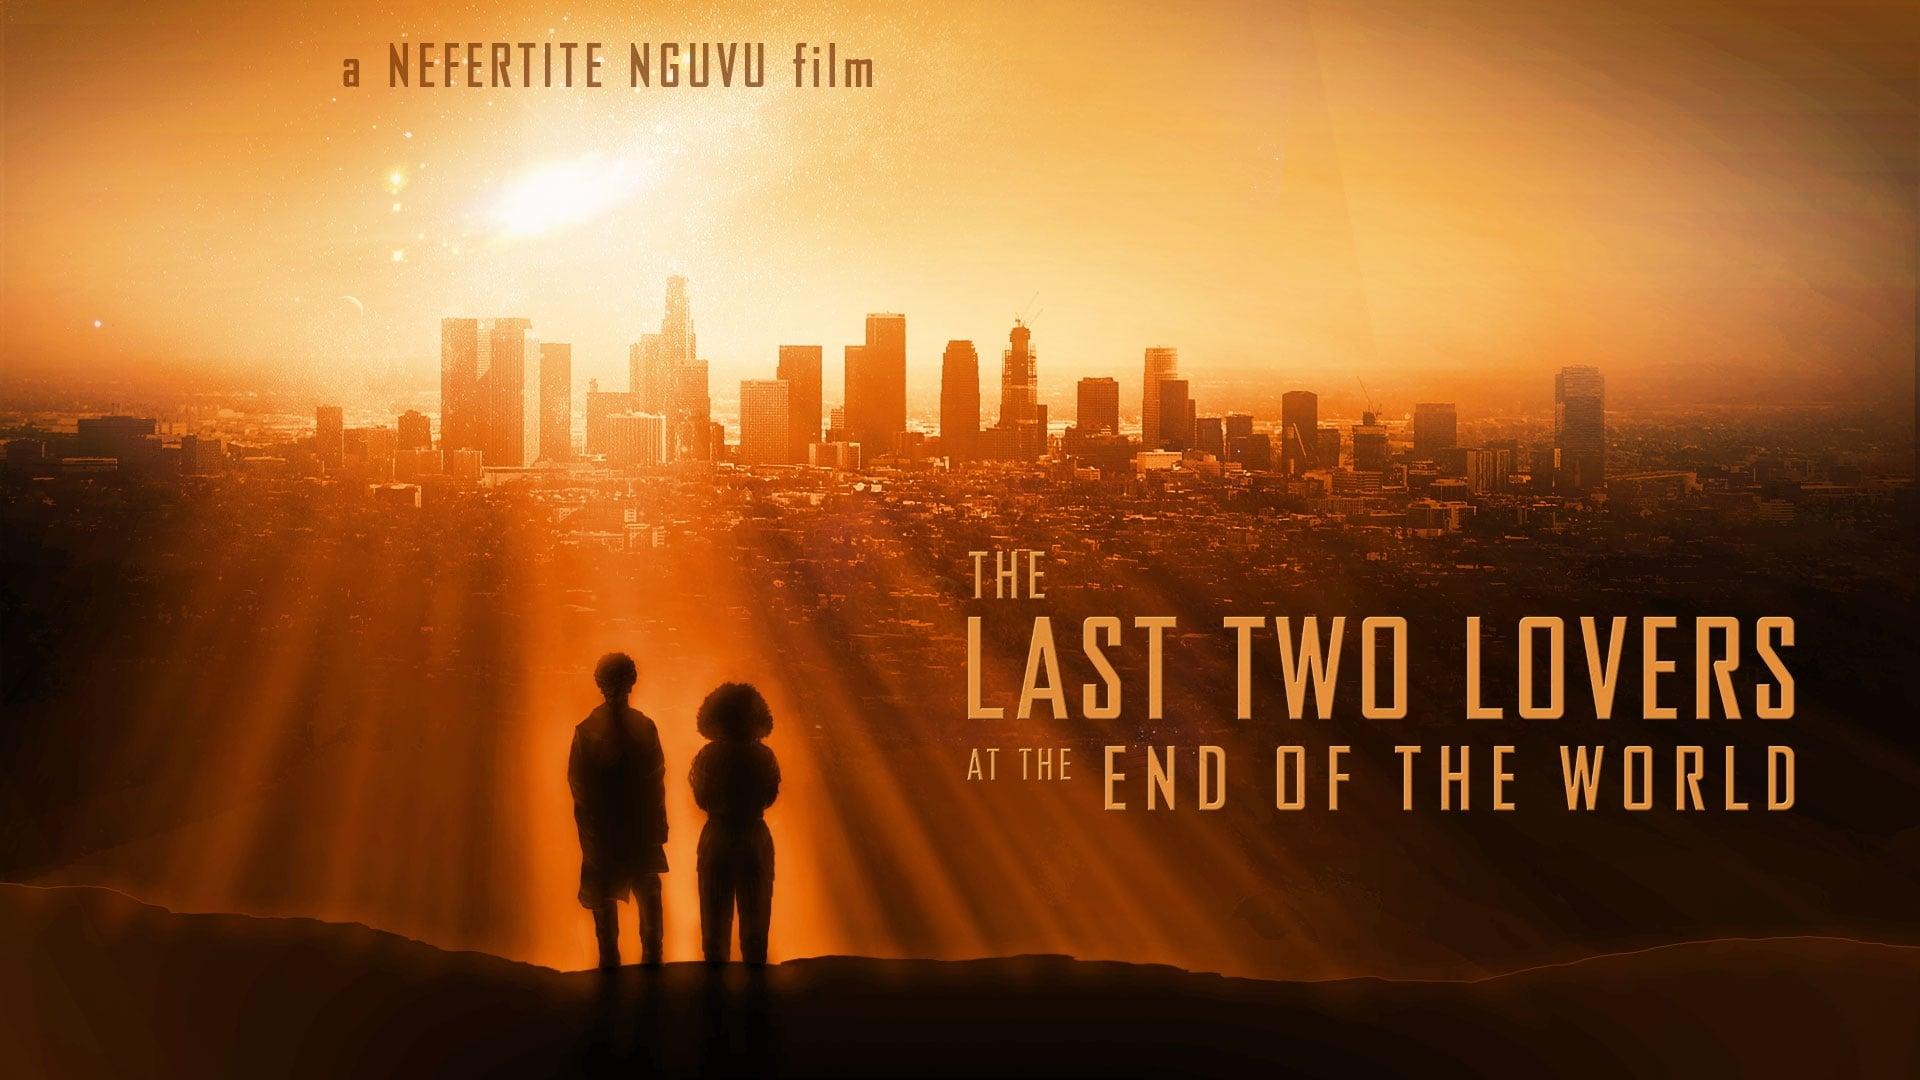 The Last Two Lovers at the End of the World backdrop